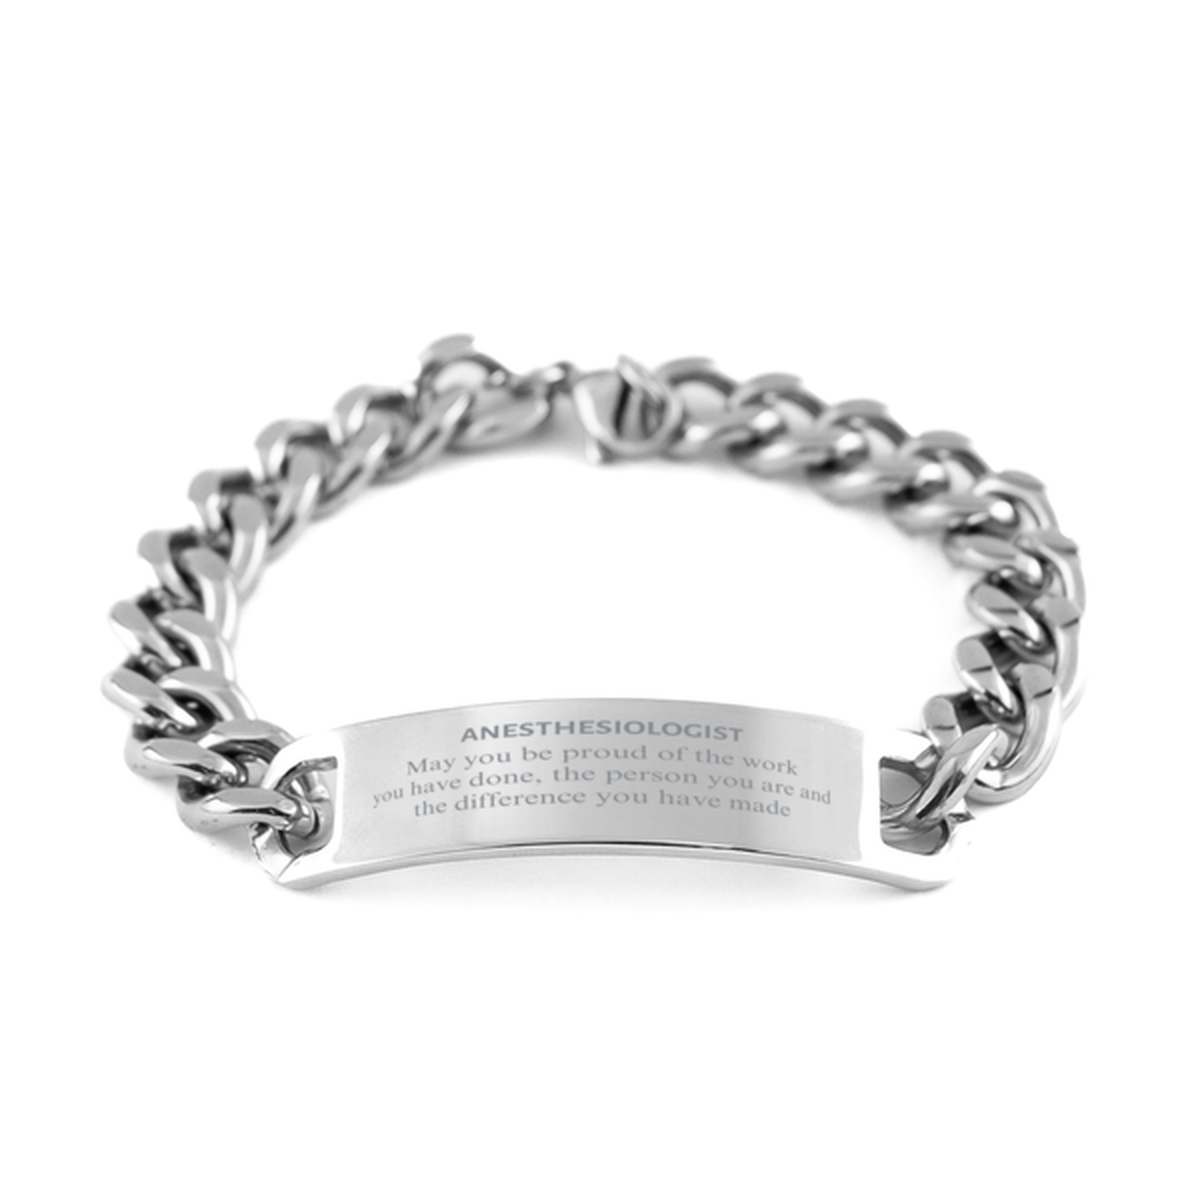 Anesthesiologist May you be proud of the work you have done, Retirement Anesthesiologist Cuban Chain Stainless Steel Bracelet for Colleague Appreciation Gifts Amazing for Anesthesiologist